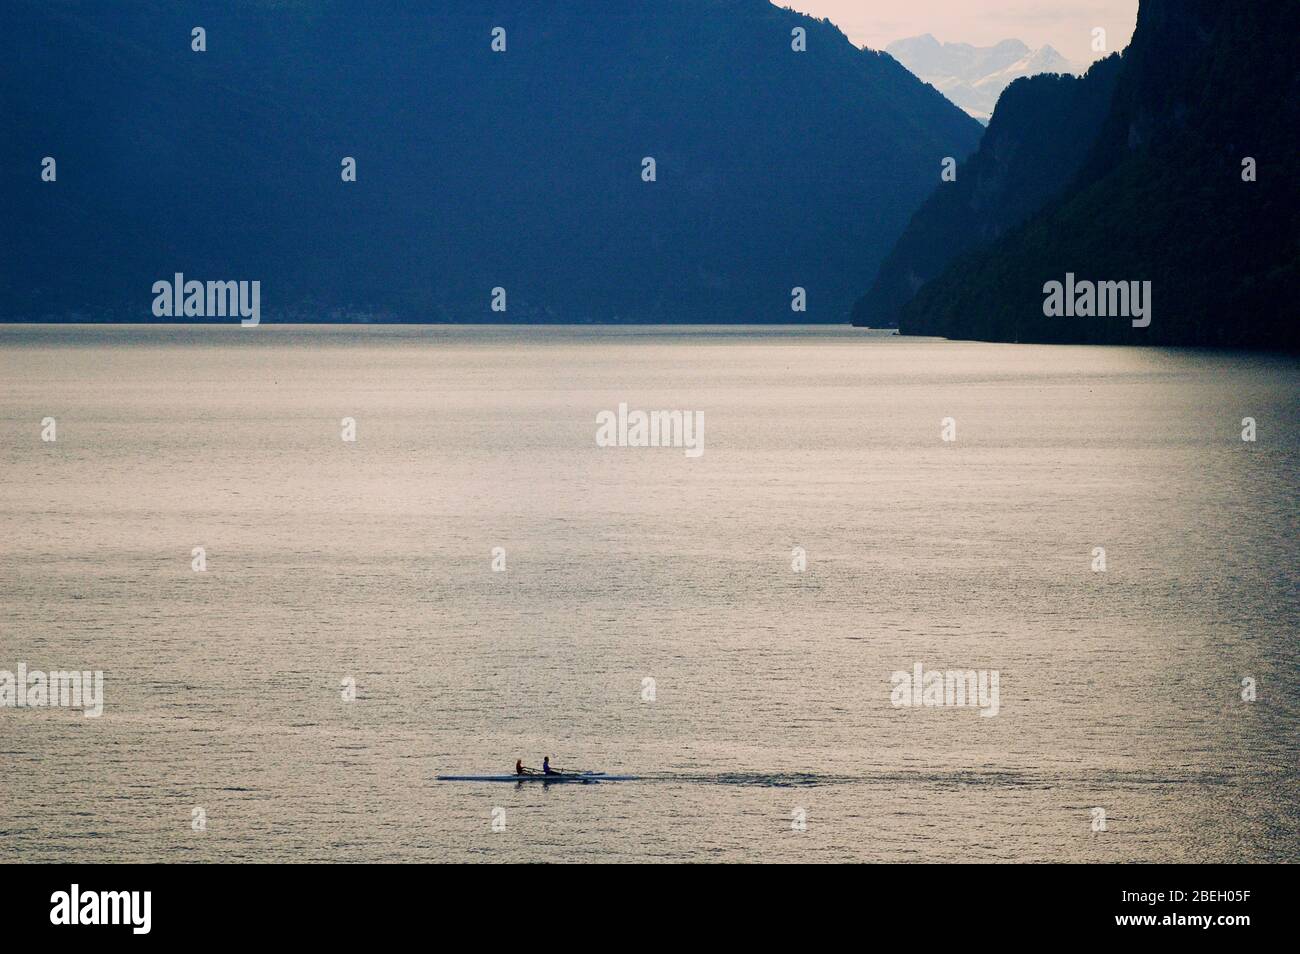 A pair of rowers glide through the calm waters of Lake Lucerne Stock Photo